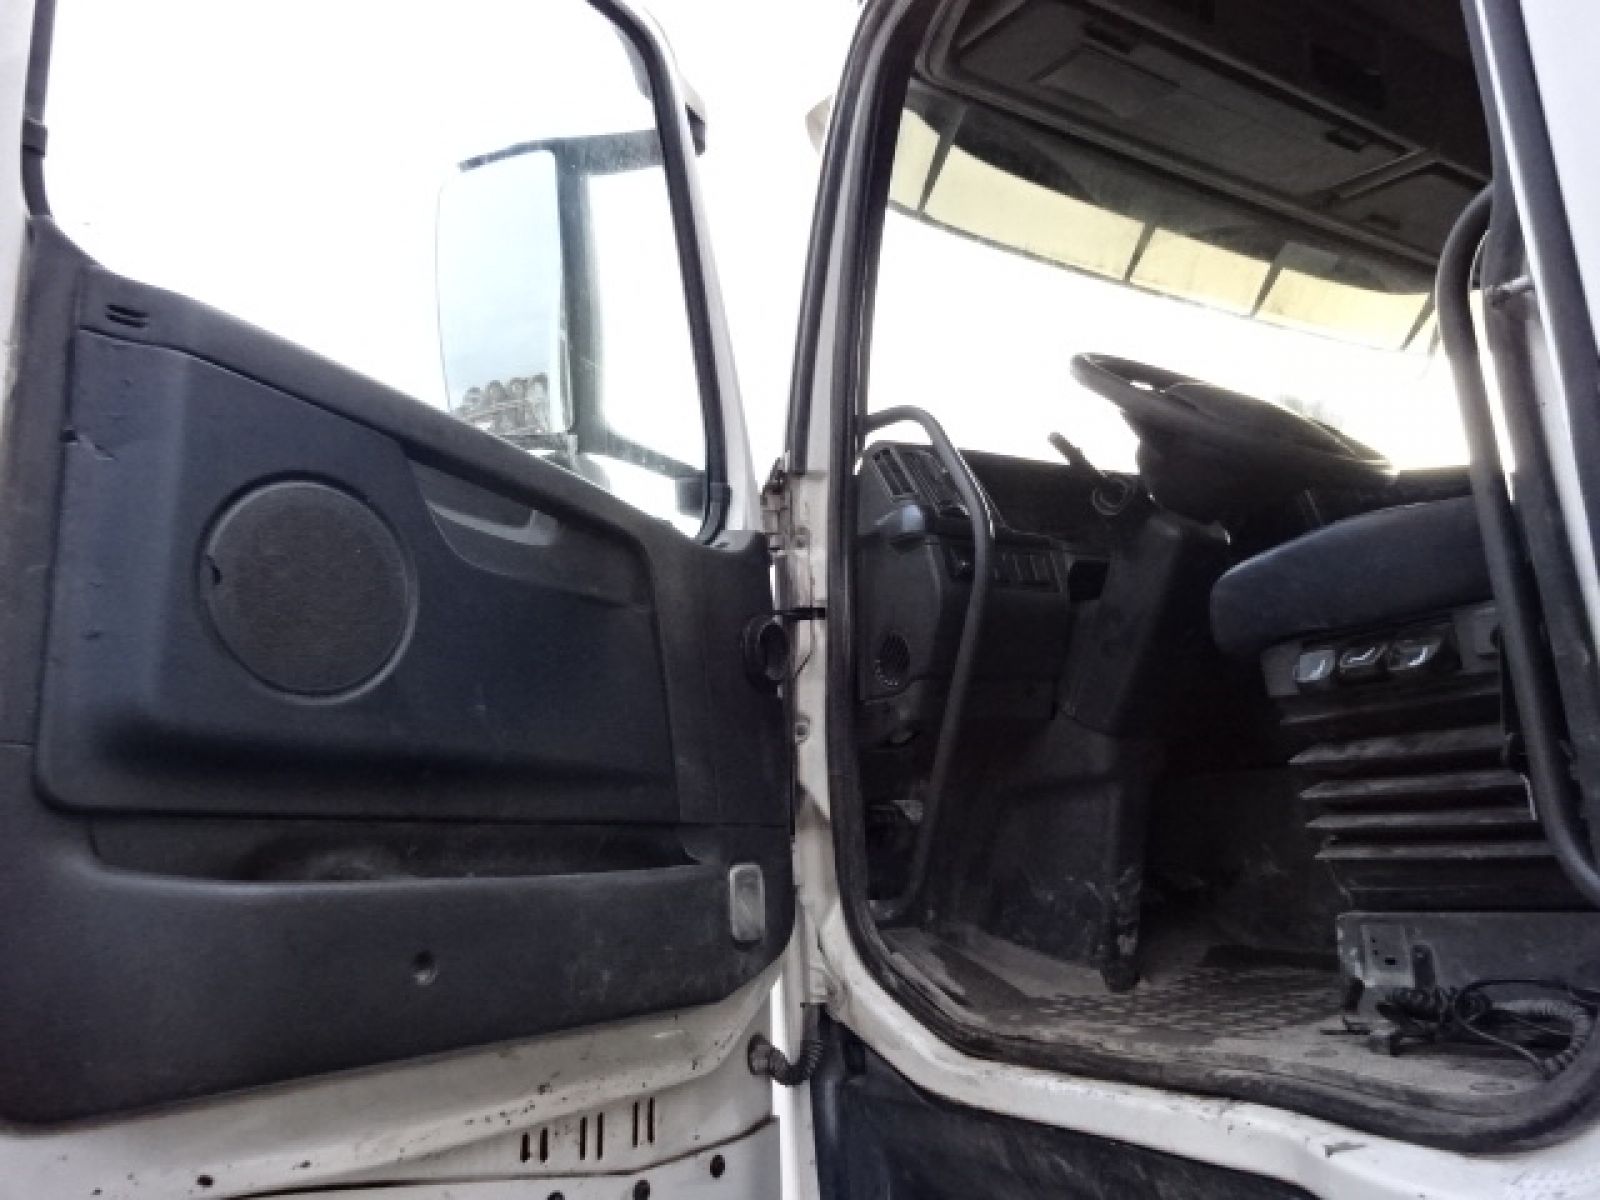 Vente occasion  Tracteur - VOLVO FH 460  Tracteur (Belgique - Europe) - Houffalize Trading s.a.